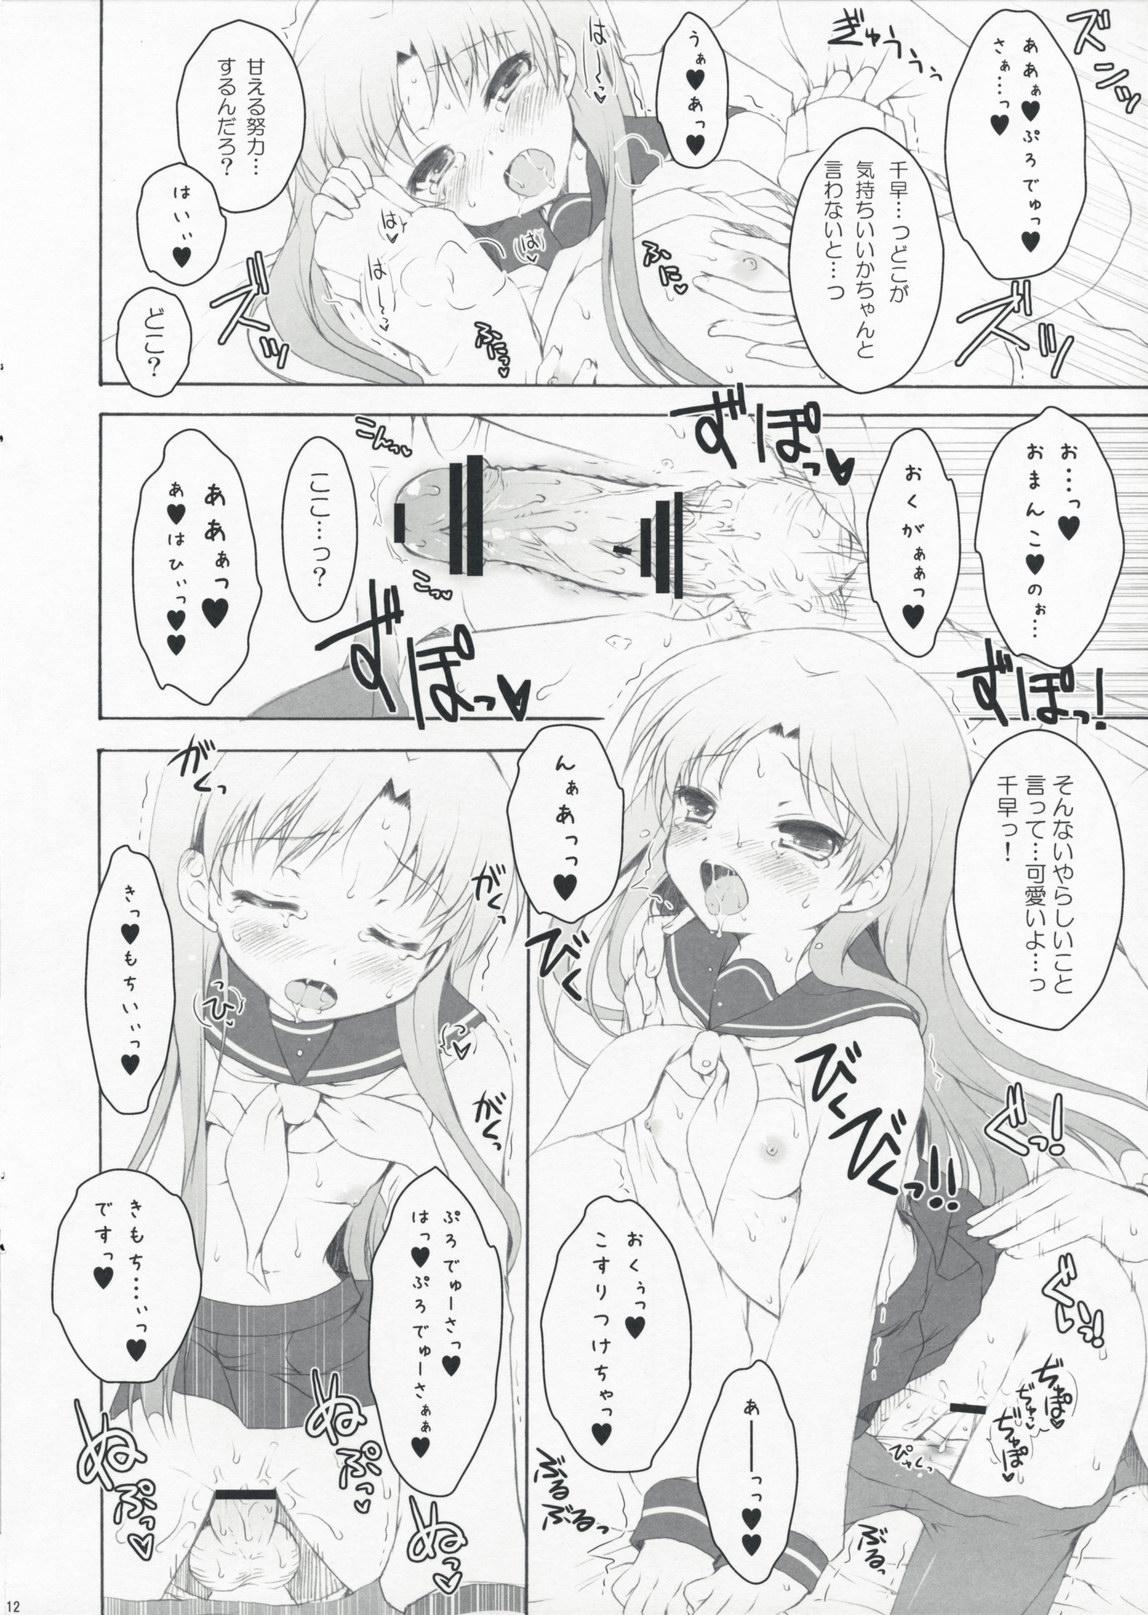 Ink miss you - The idolmaster Lady - Page 11